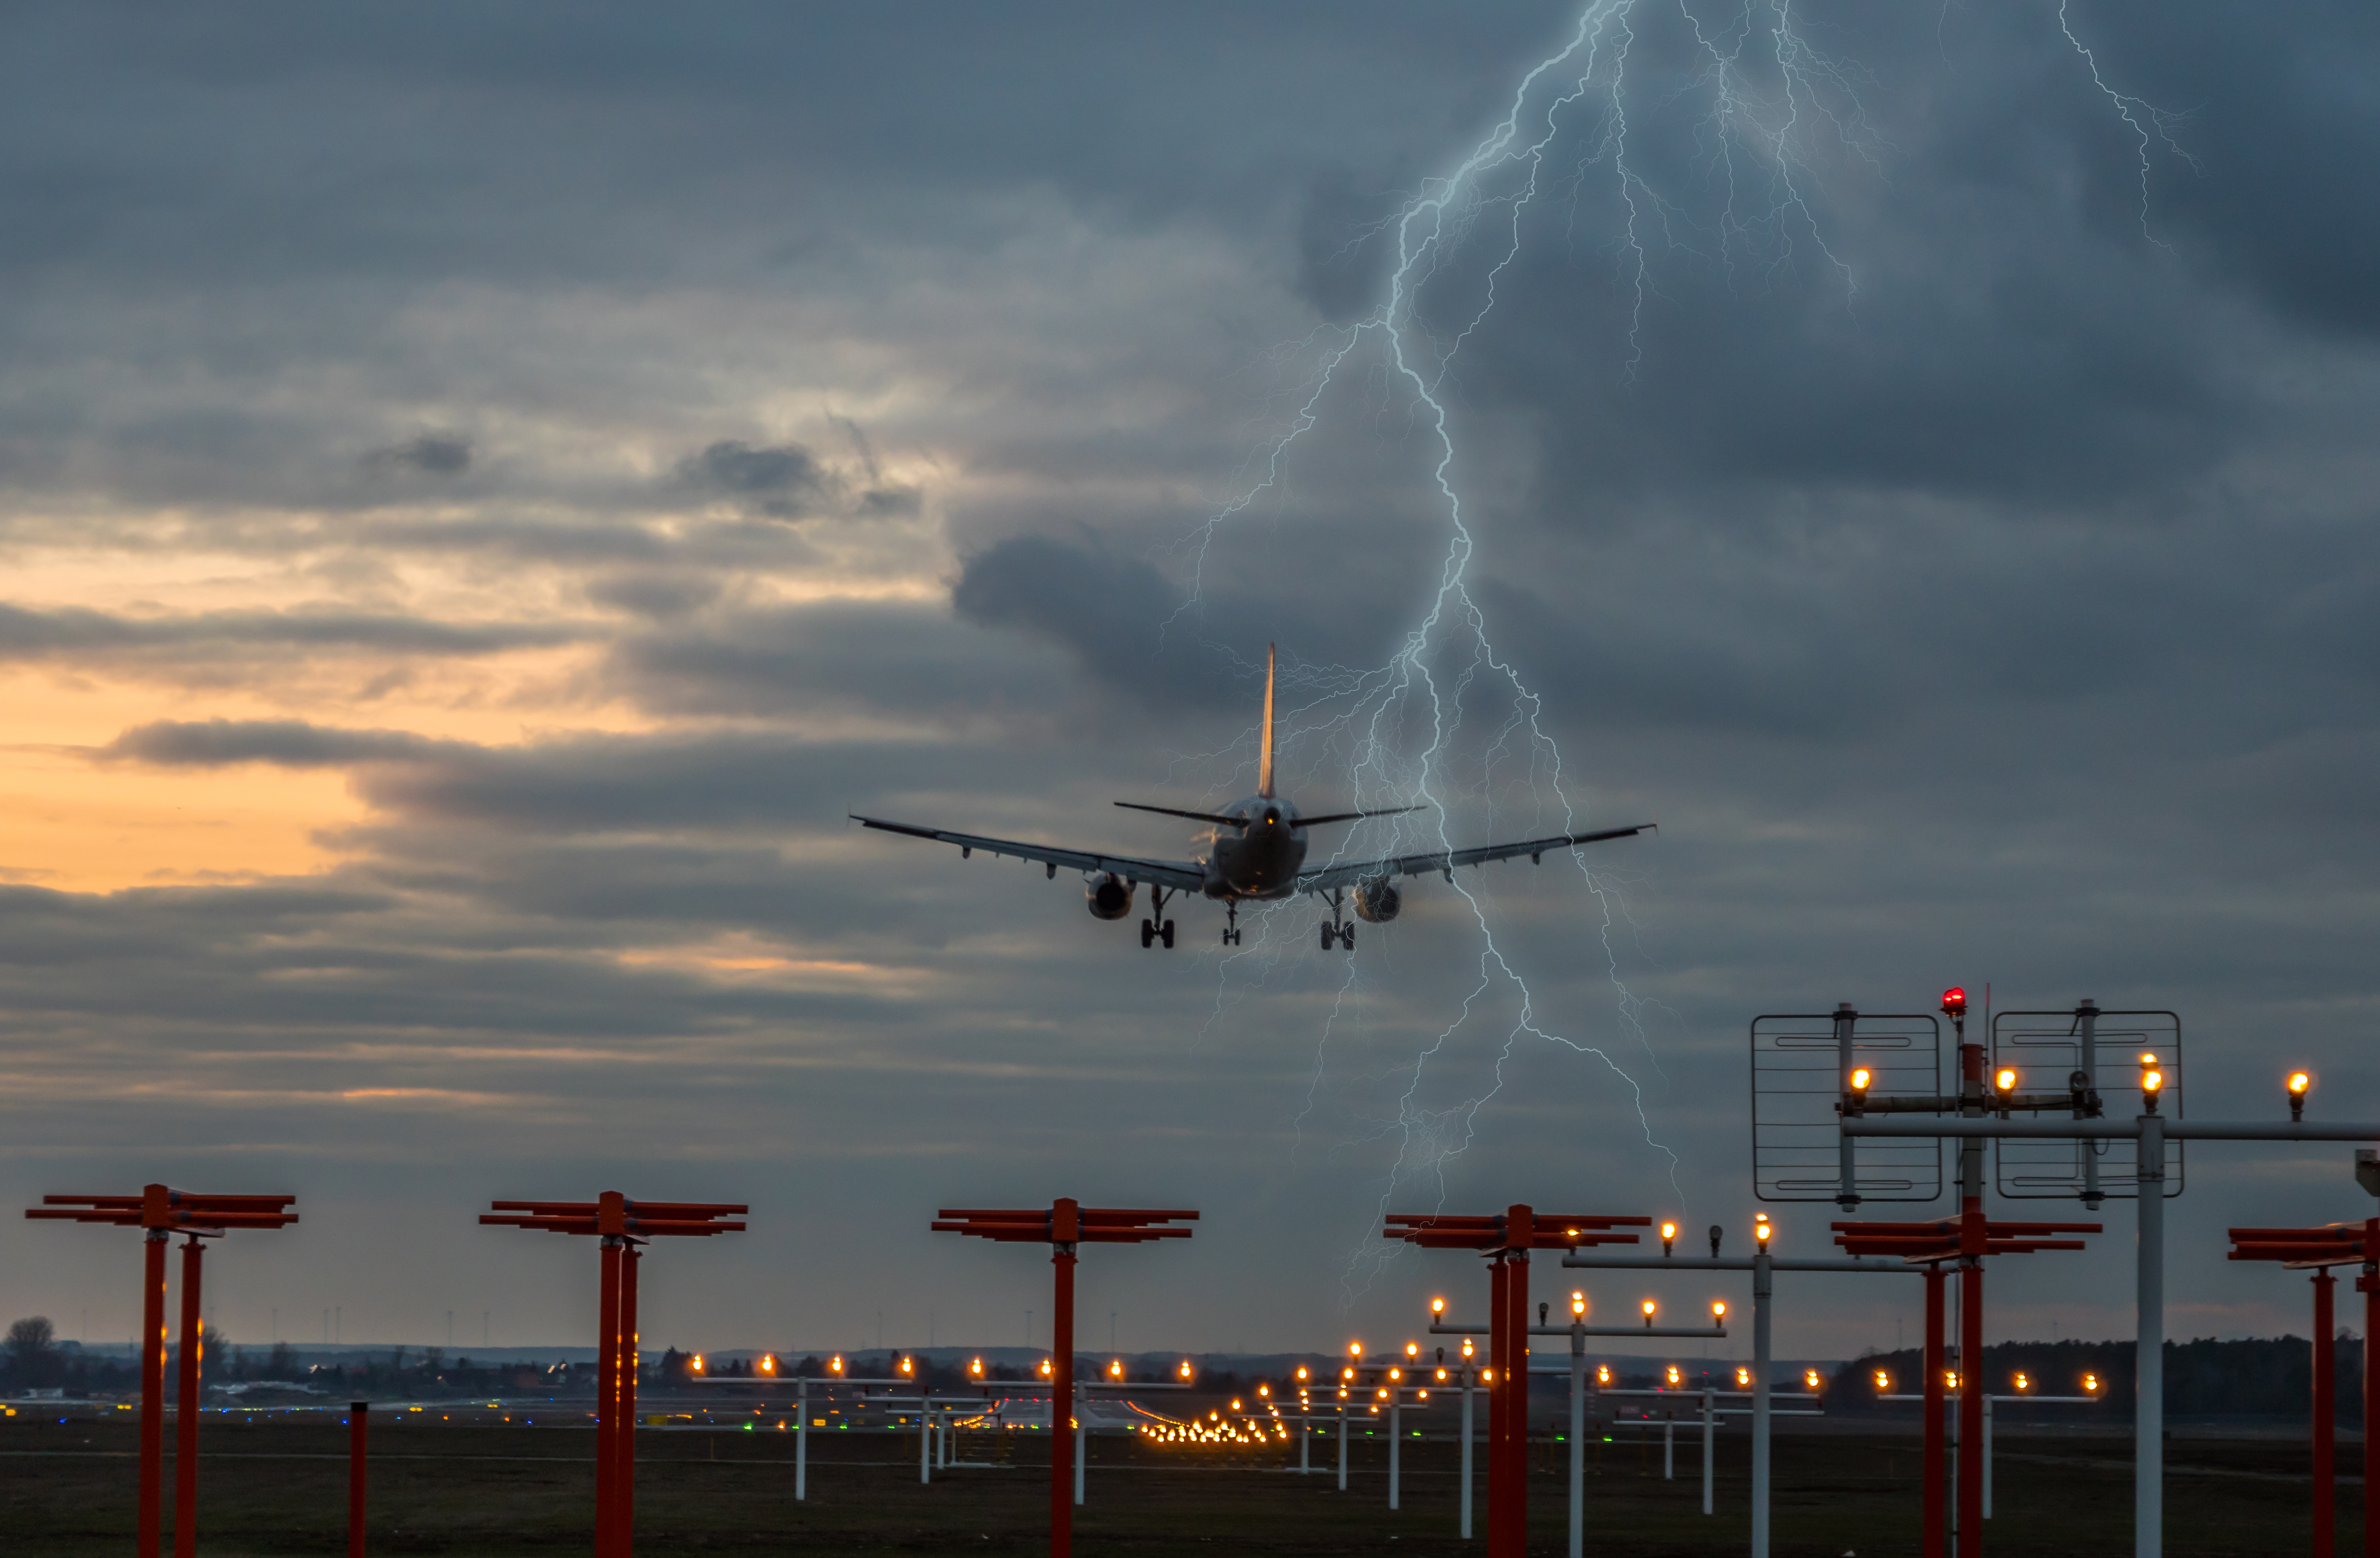 Airplane take-off during severe weather